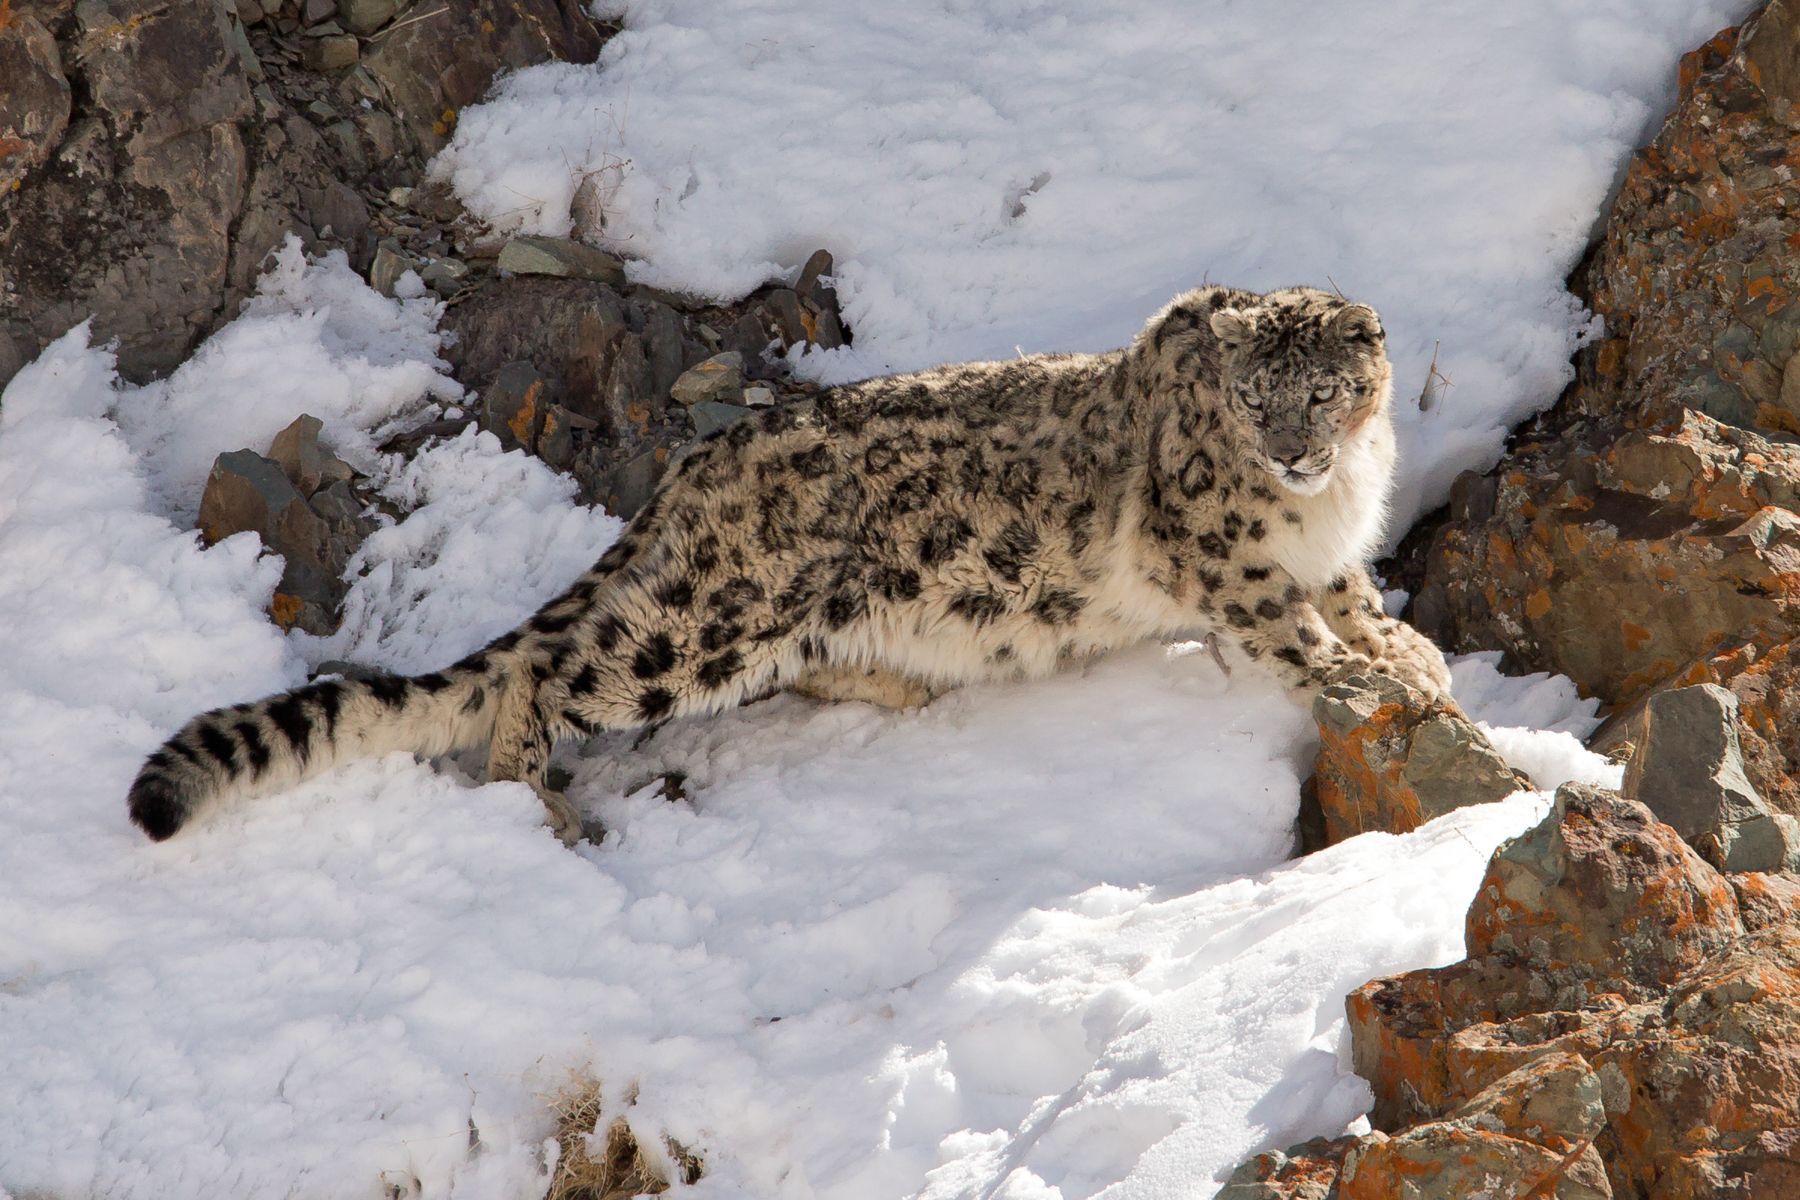 Snow Leopard on our Ladakh photography tour by Mike Watson